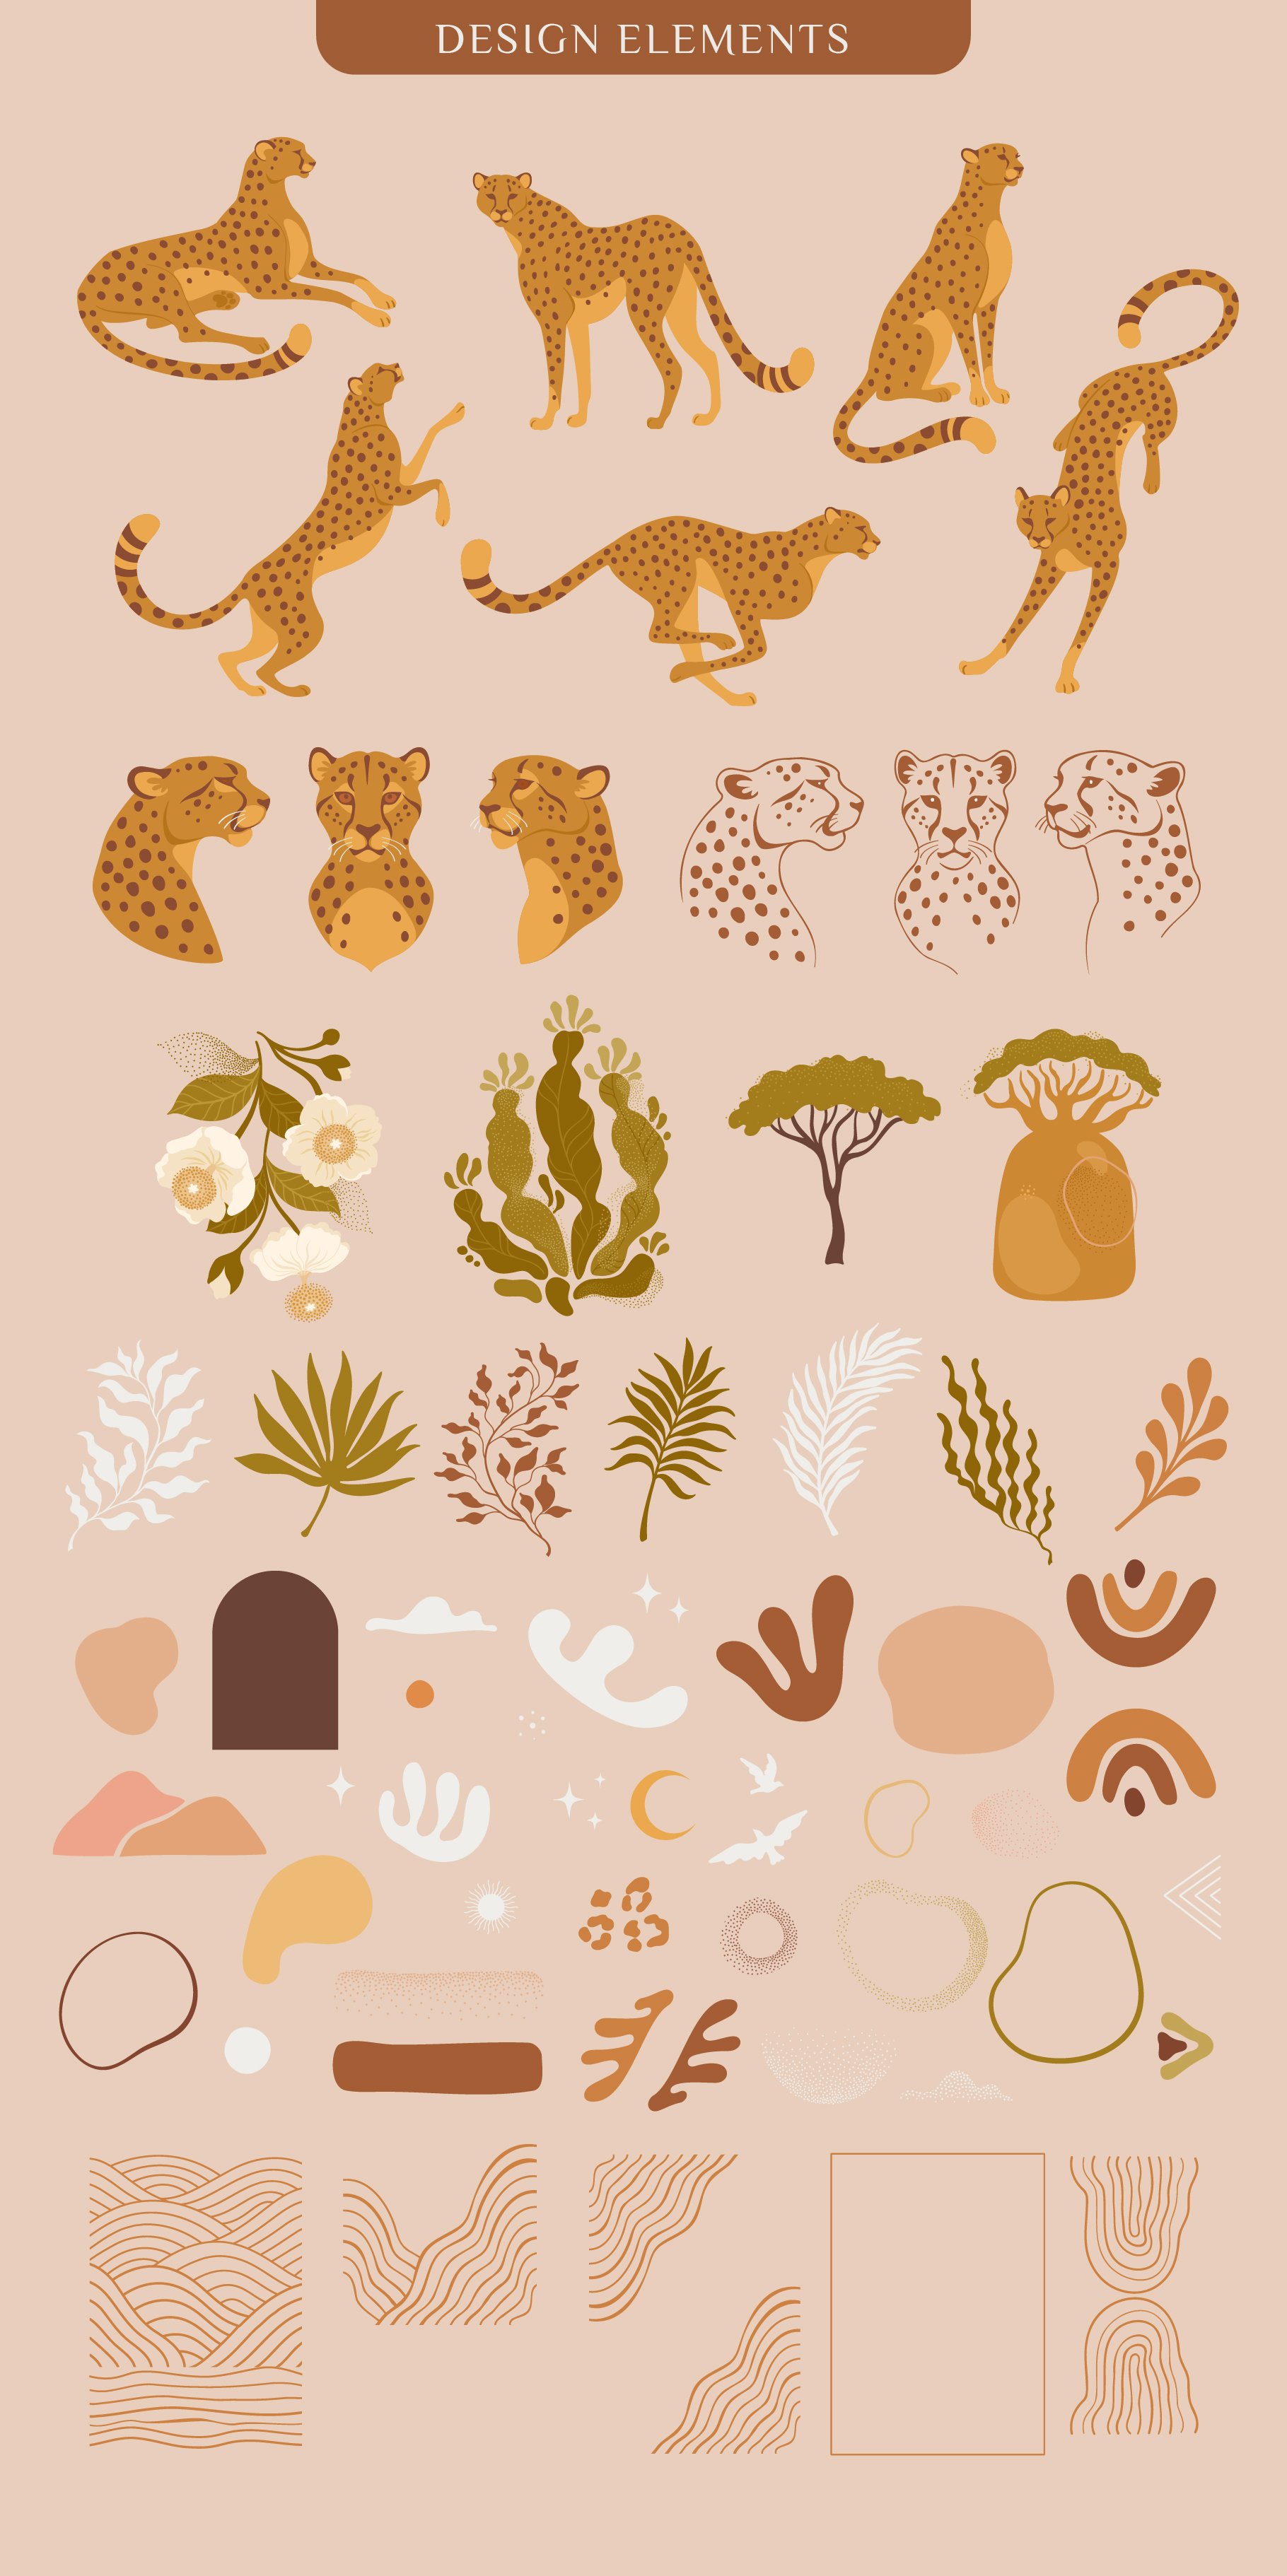 Some separate elements to create a tropical composition with leopard.